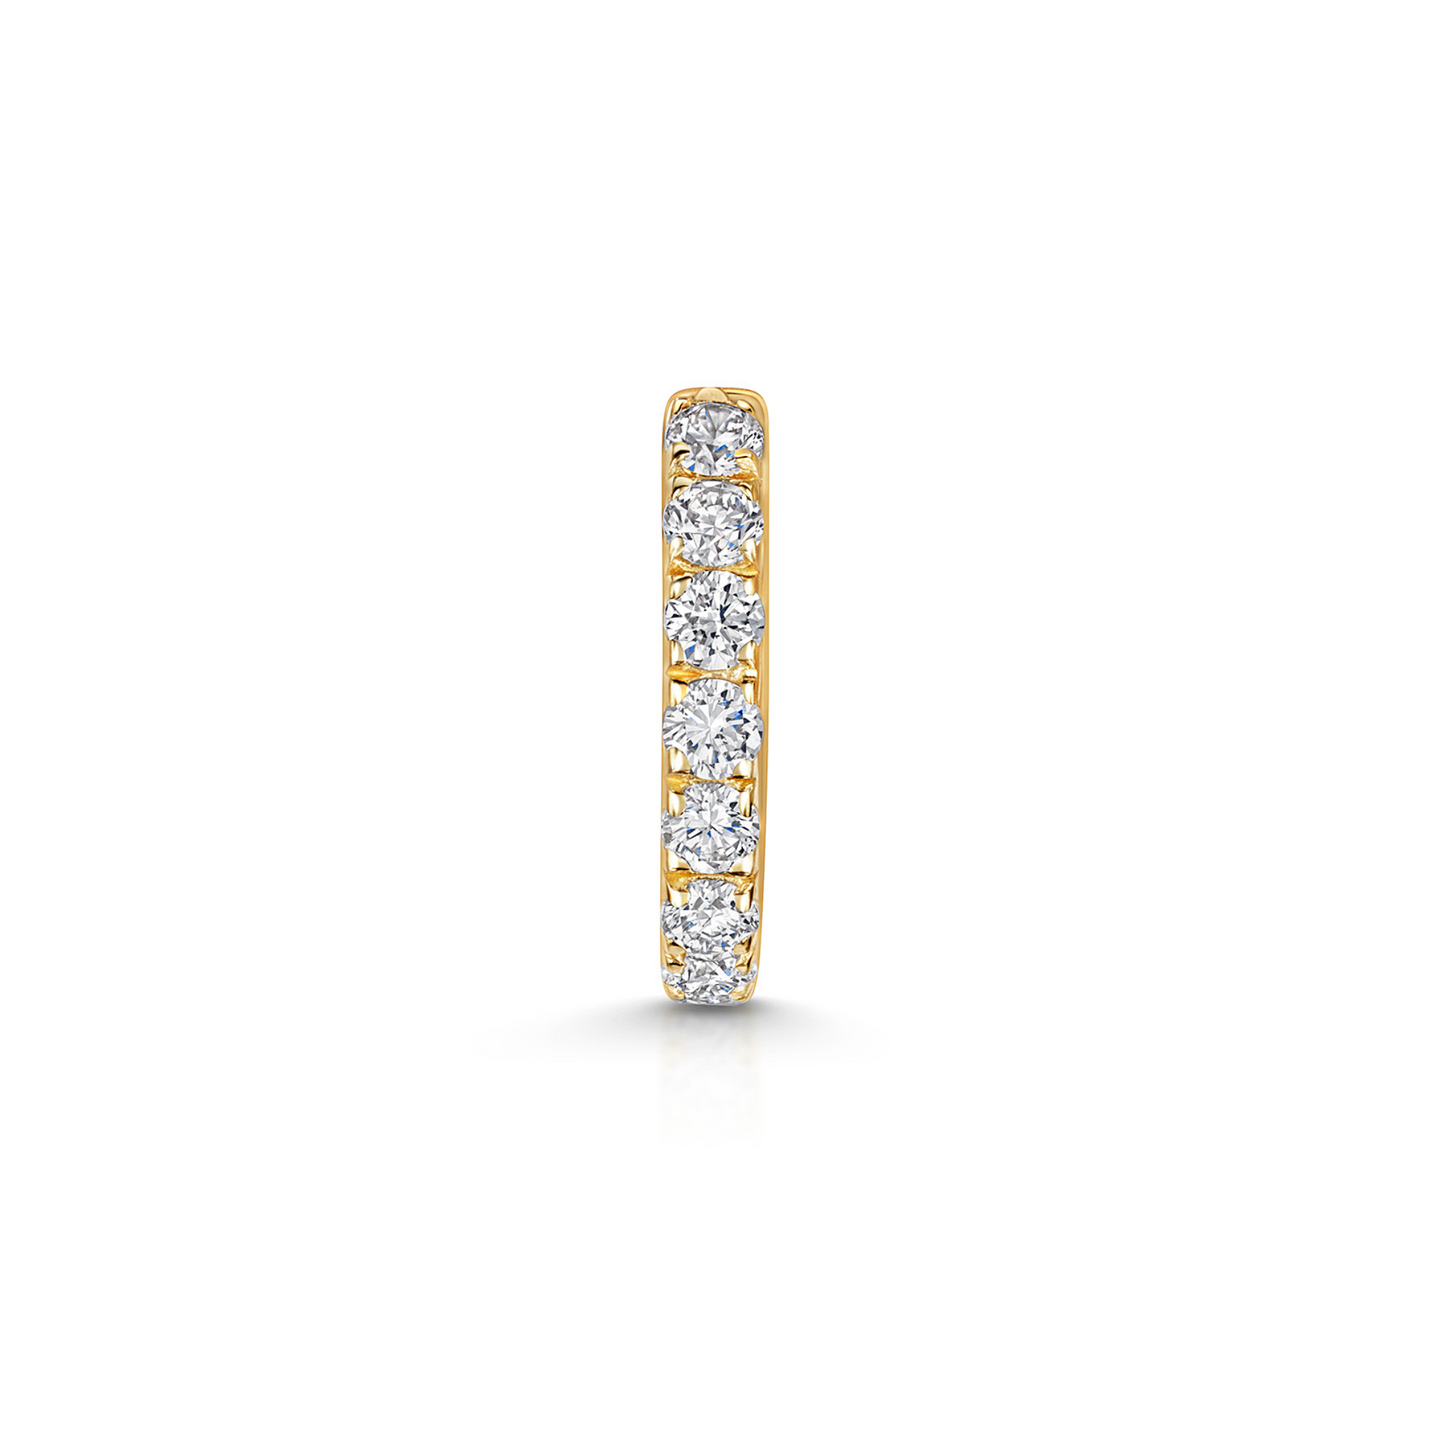 9k solid yellow gold 10mm simple crystal huggie earring